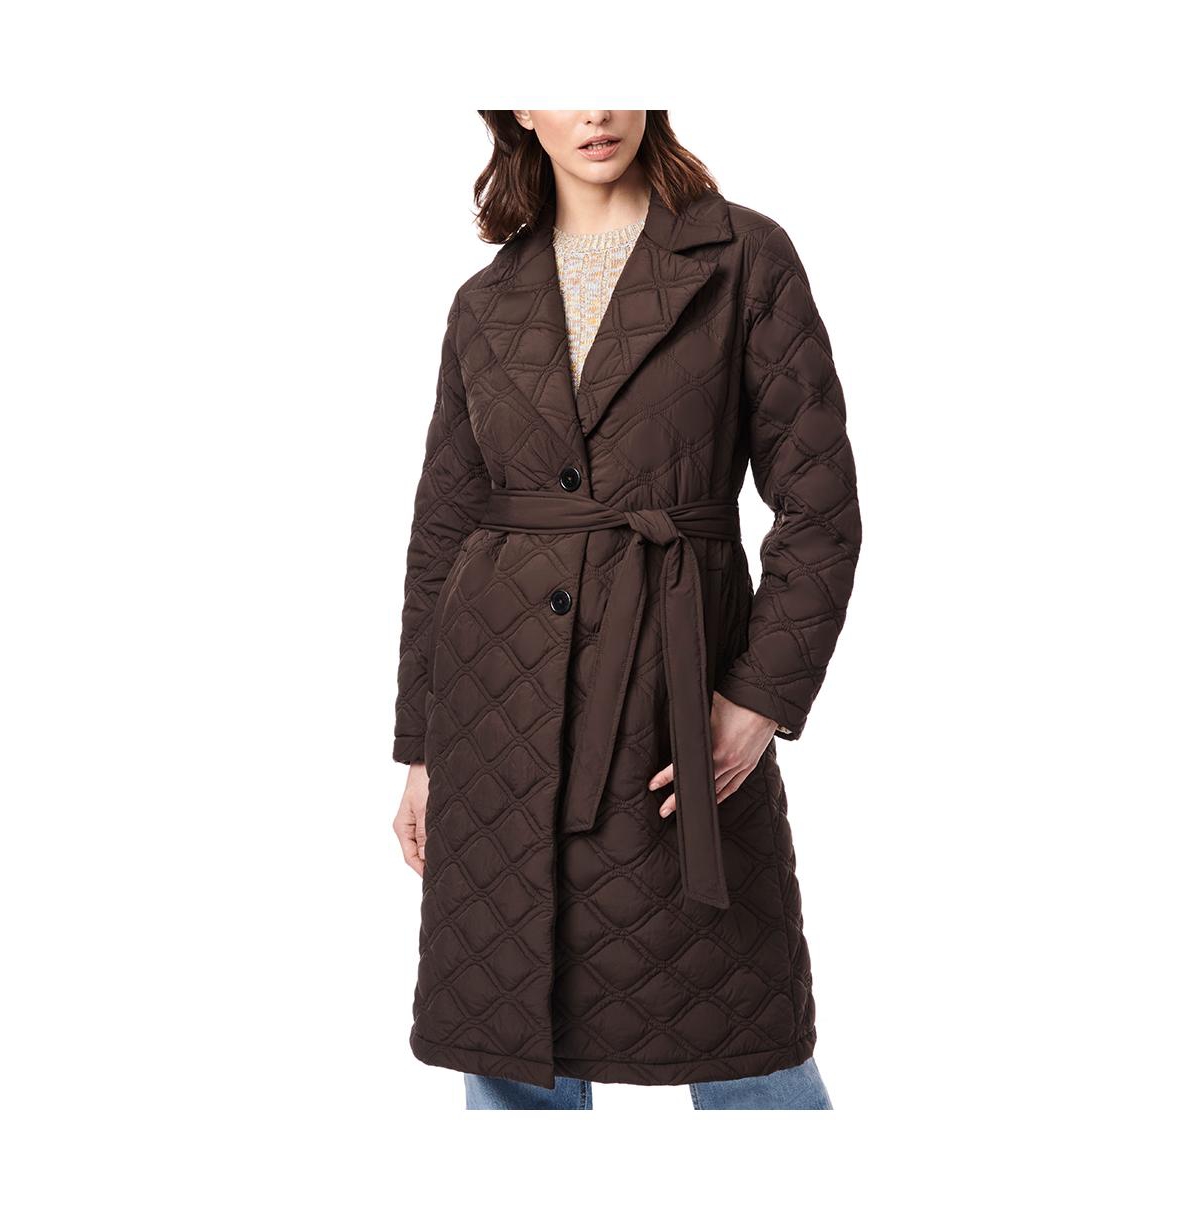 Women's Quilted Trench Coat - Coffeecake